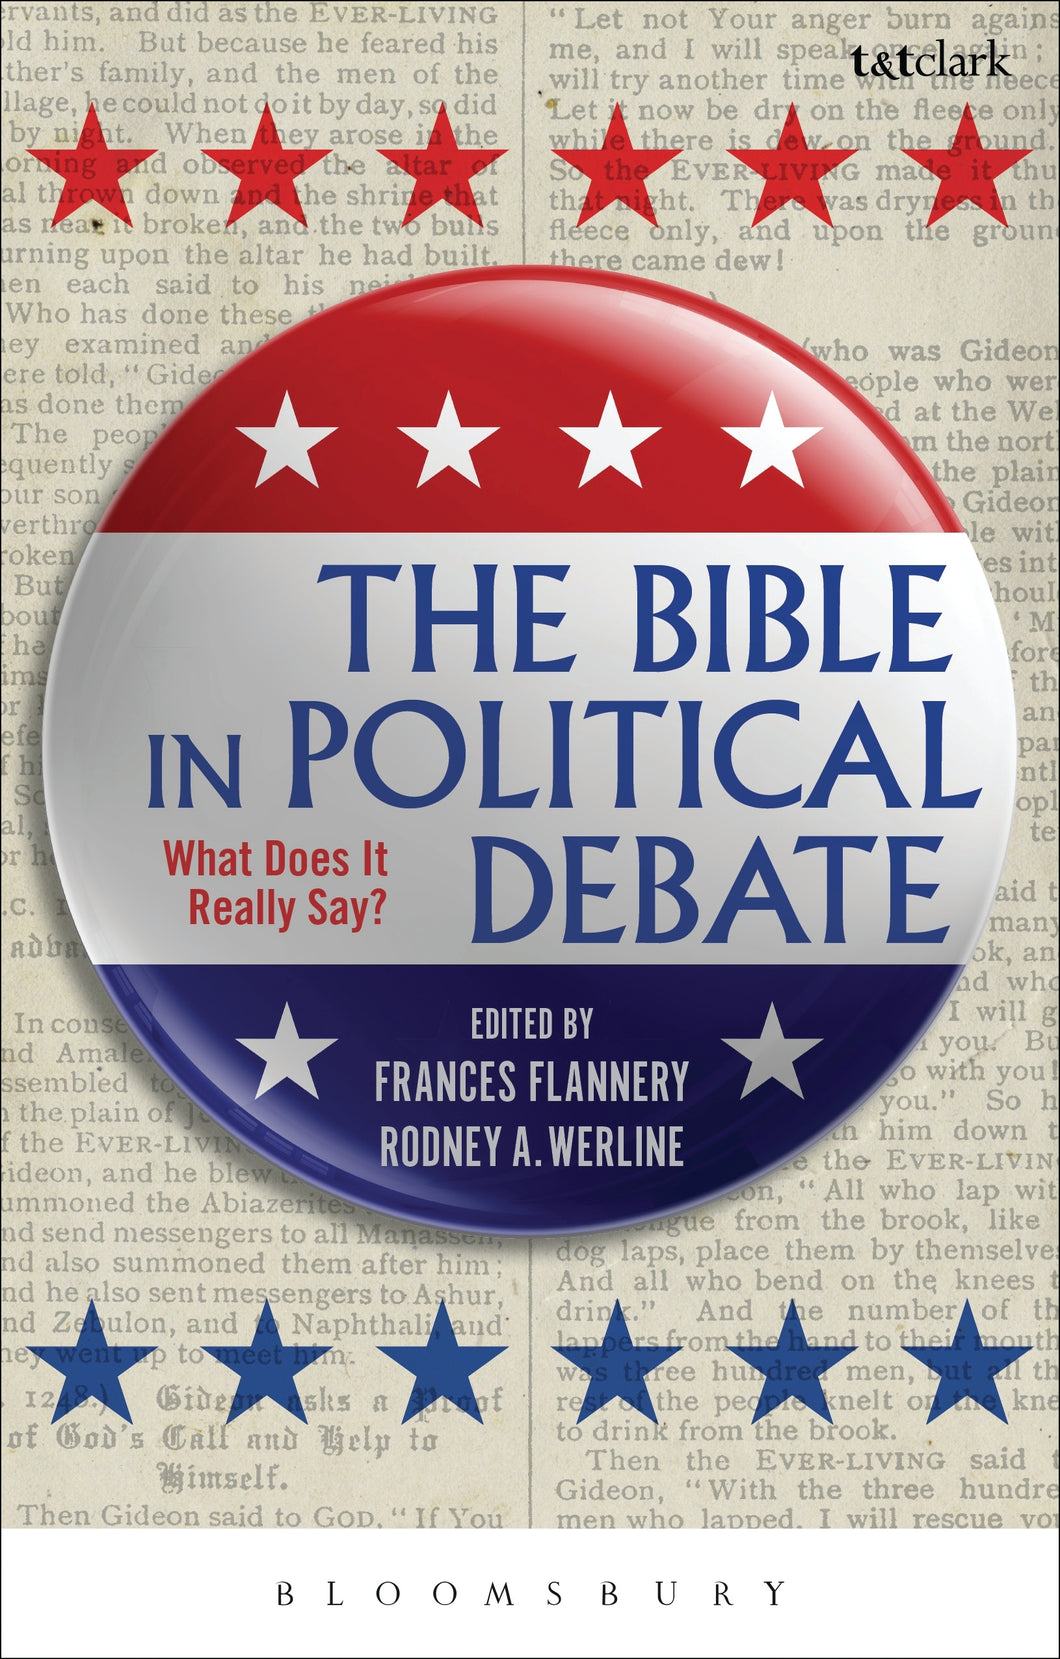 The Bible in Political Debate: What Does it Really Say?